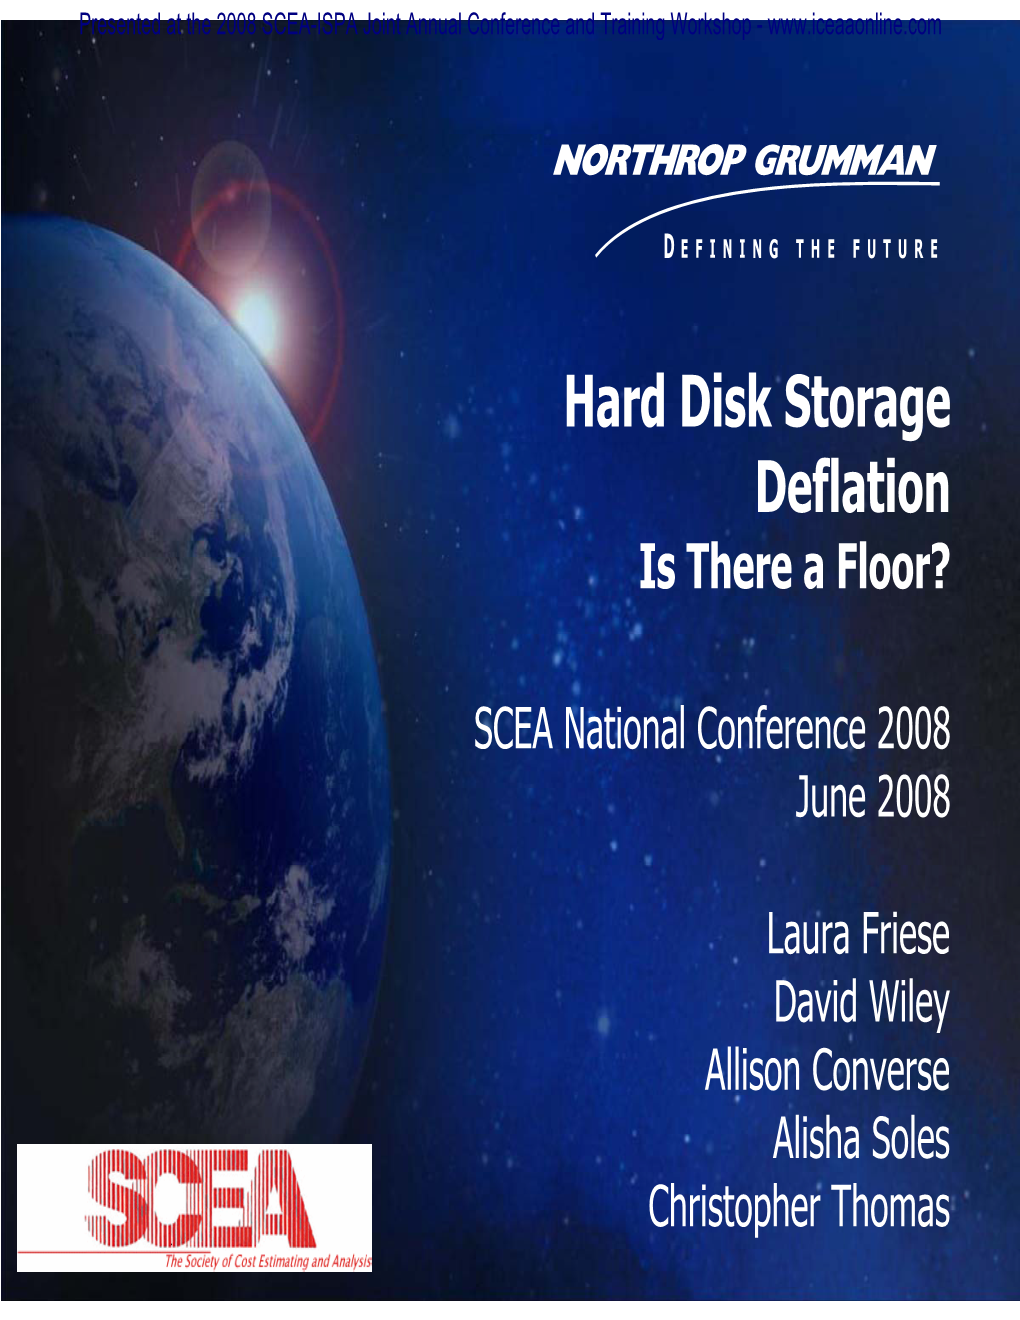 Hard Disk Storage Deflation Is There a Floor?